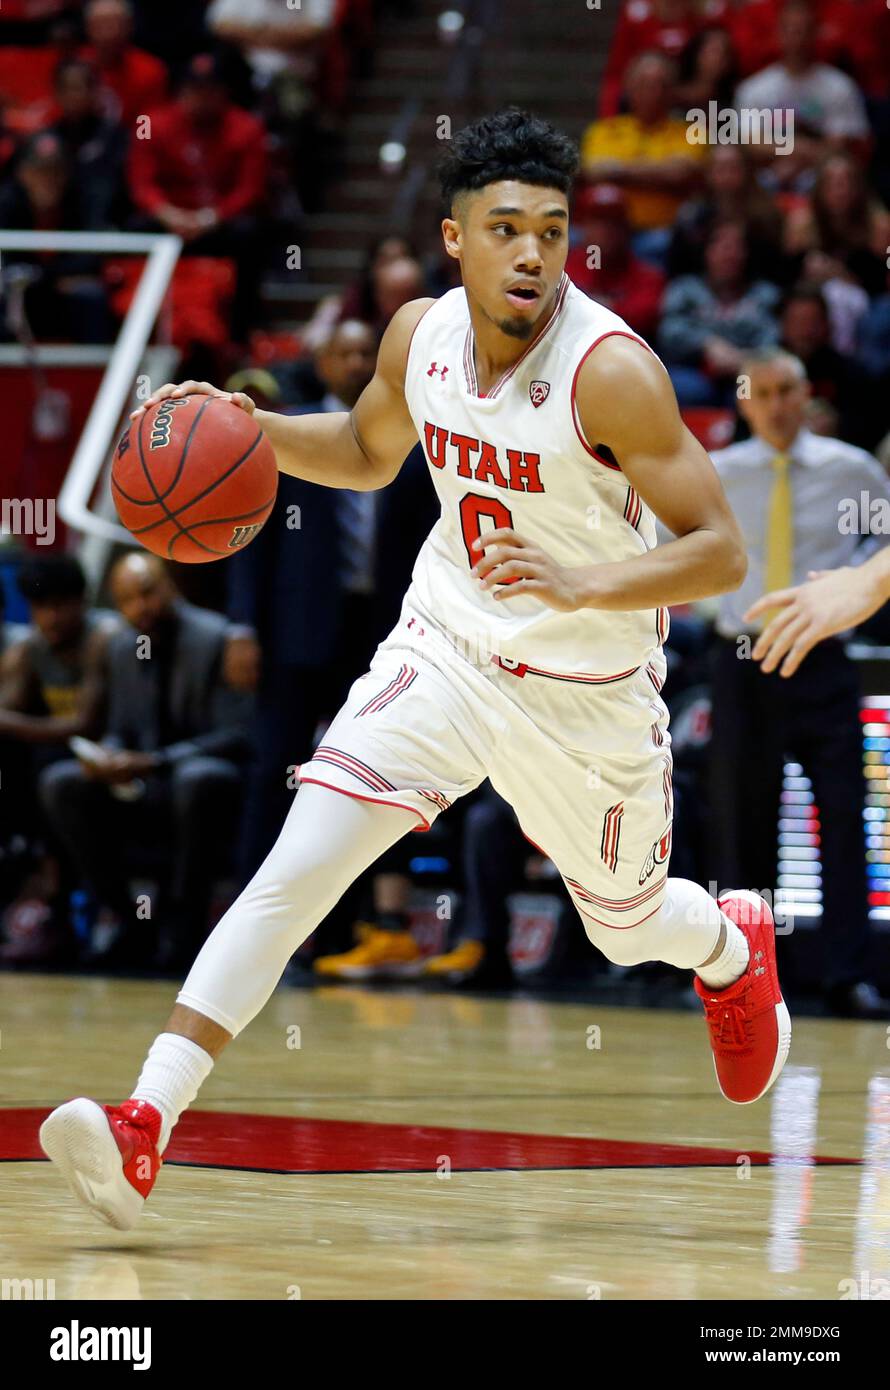 https://c8.alamy.com/comp/2MM9DXG/file-in-this-jan-7-2018-file-photo-utah-guard-sedrick-barefield-0-brings-the-ball-up-court-in-the-second-half-during-an-ncaa-college-basketball-game-against-arizona-state-in-salt-lake-city-the-6-foot-2-senior-emerged-as-one-of-utahs-most-dangerous-shooters-averaging-120-points-per-game-while-converting-354-percent-of-his-shots-from-3-point-rangeap-photorick-bowmer-file-2MM9DXG.jpg